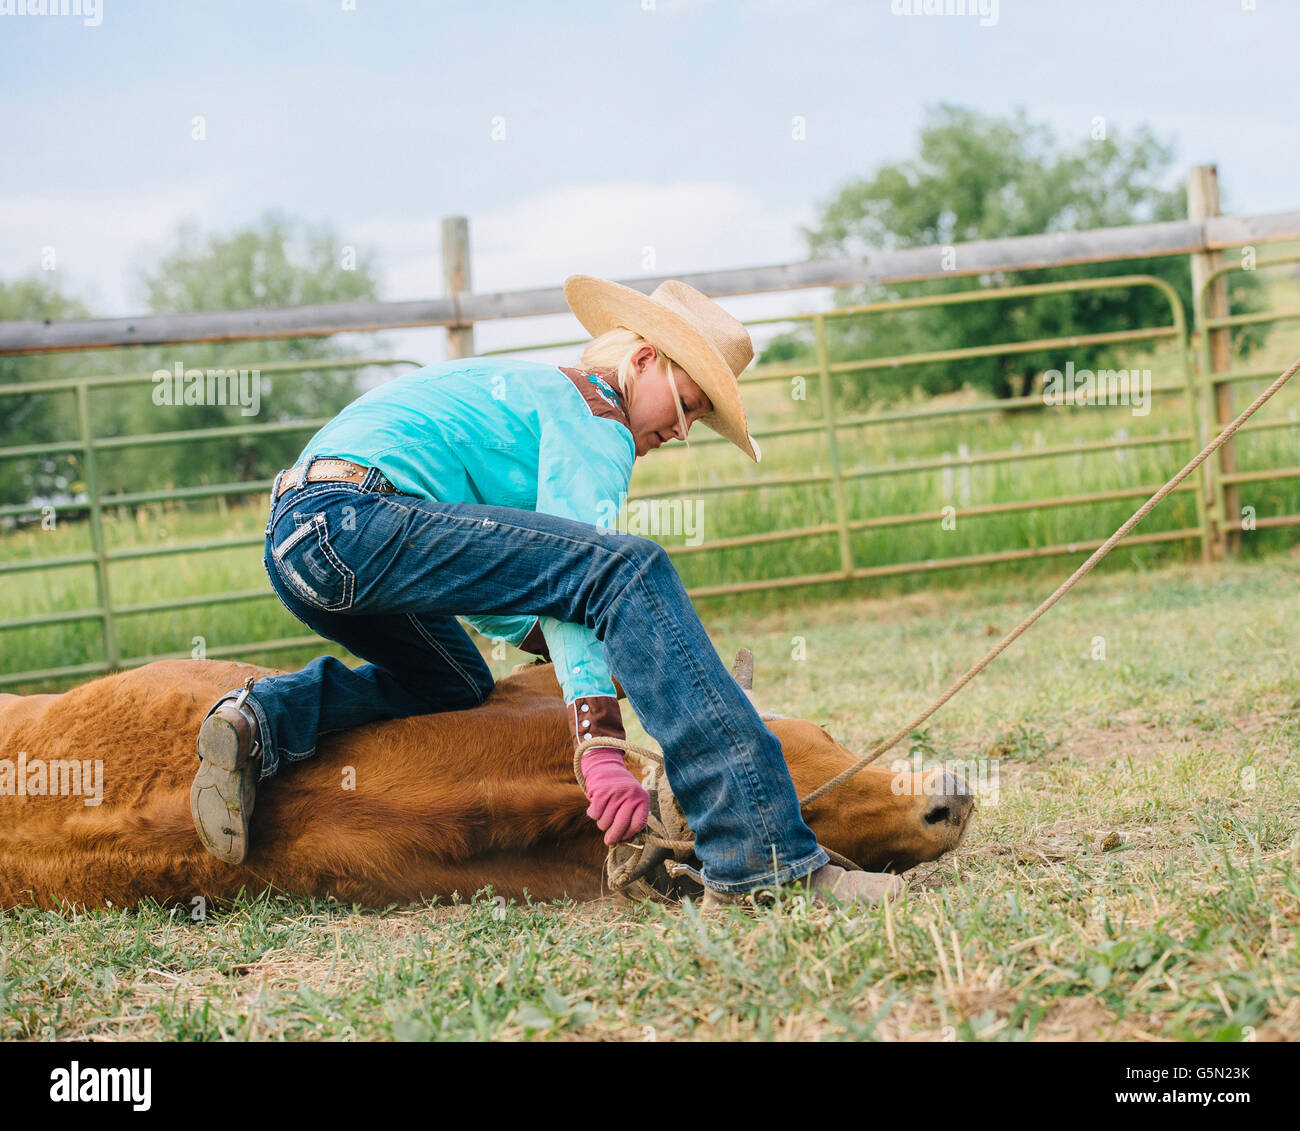 Cowgirl tying cattle on ranch Stock Photo